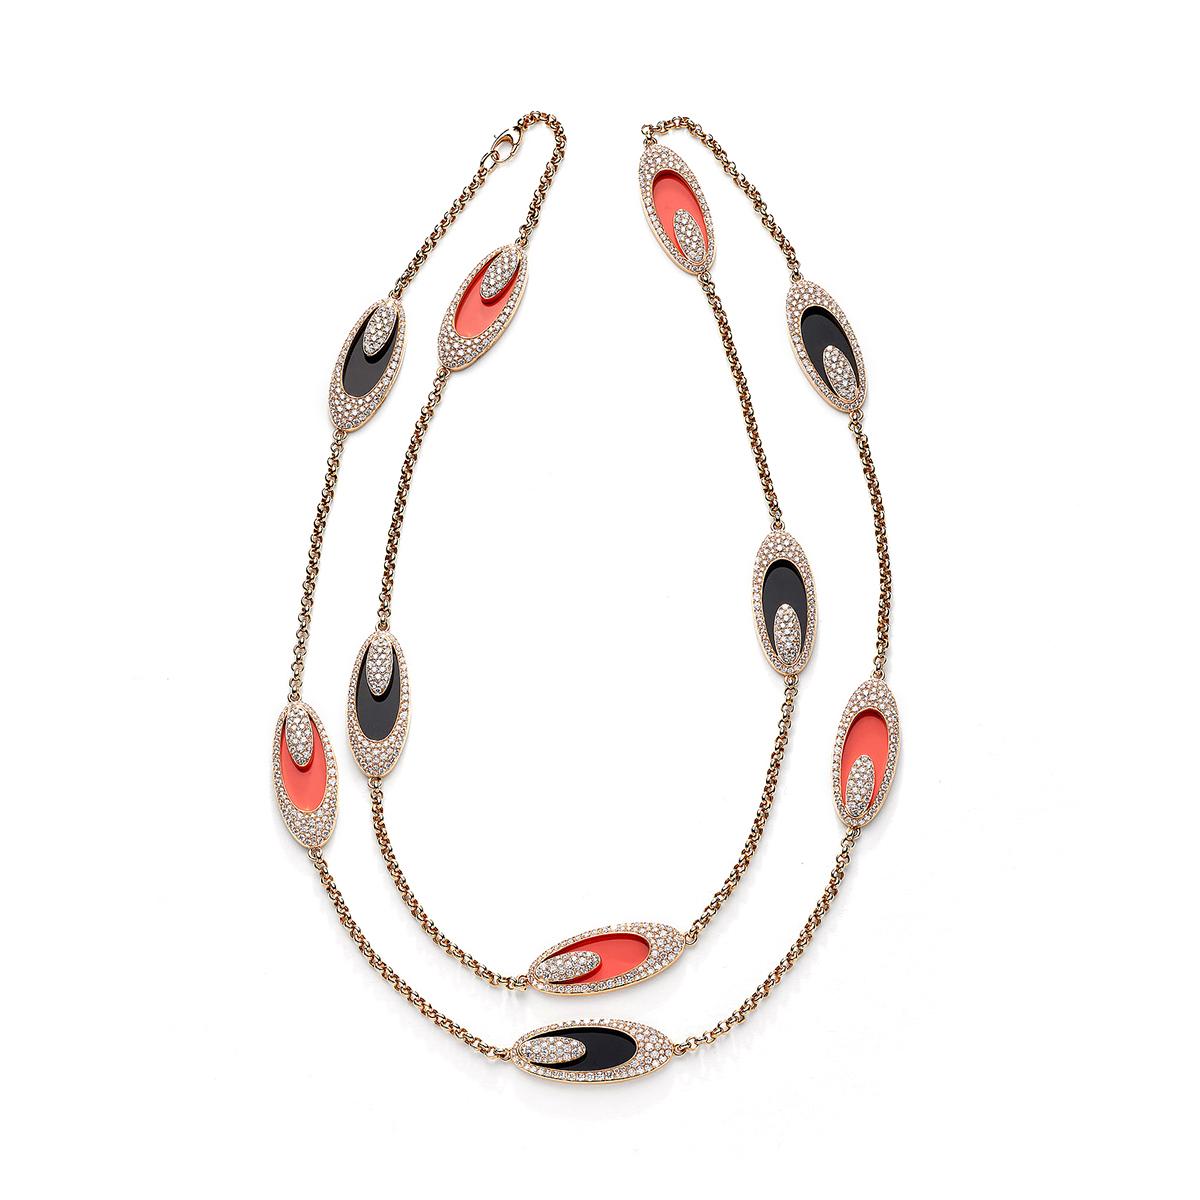 Necklace in 18kt pink gold set with 920 diamonds 14.37 cts, 5 onyx 24.83 cts and 5 coral 18.41 cts